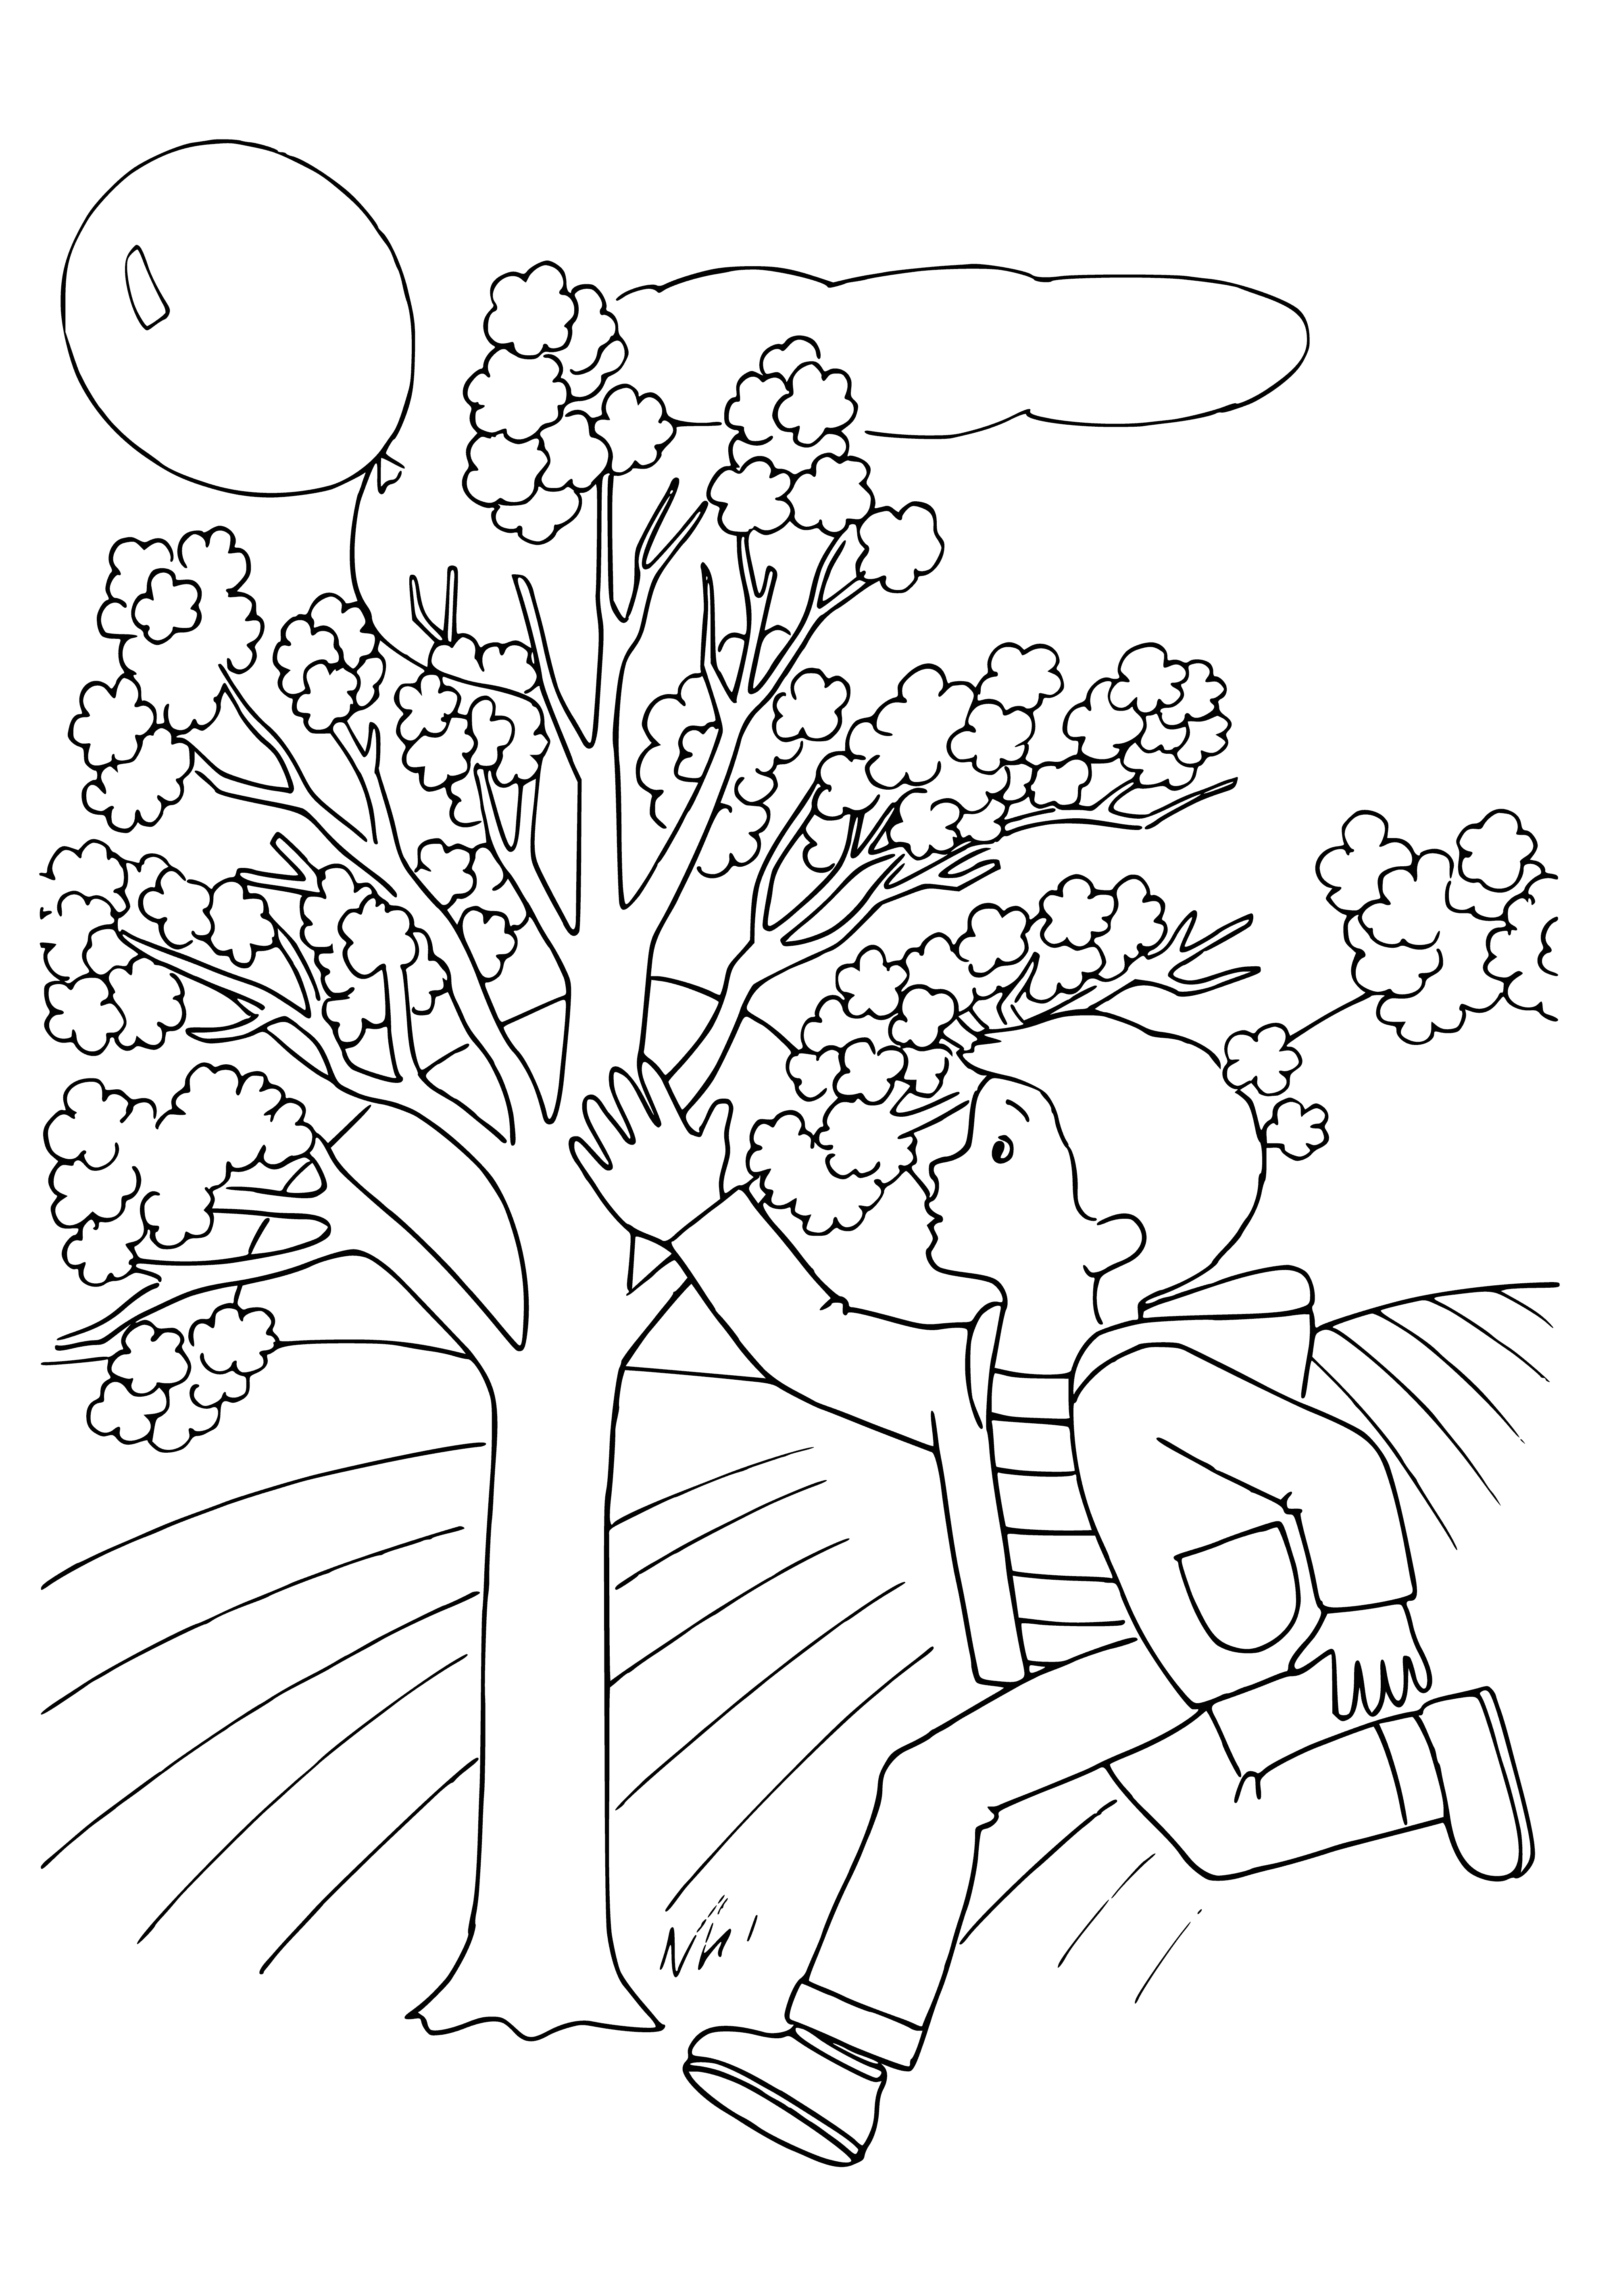 Boy with a ball coloring page